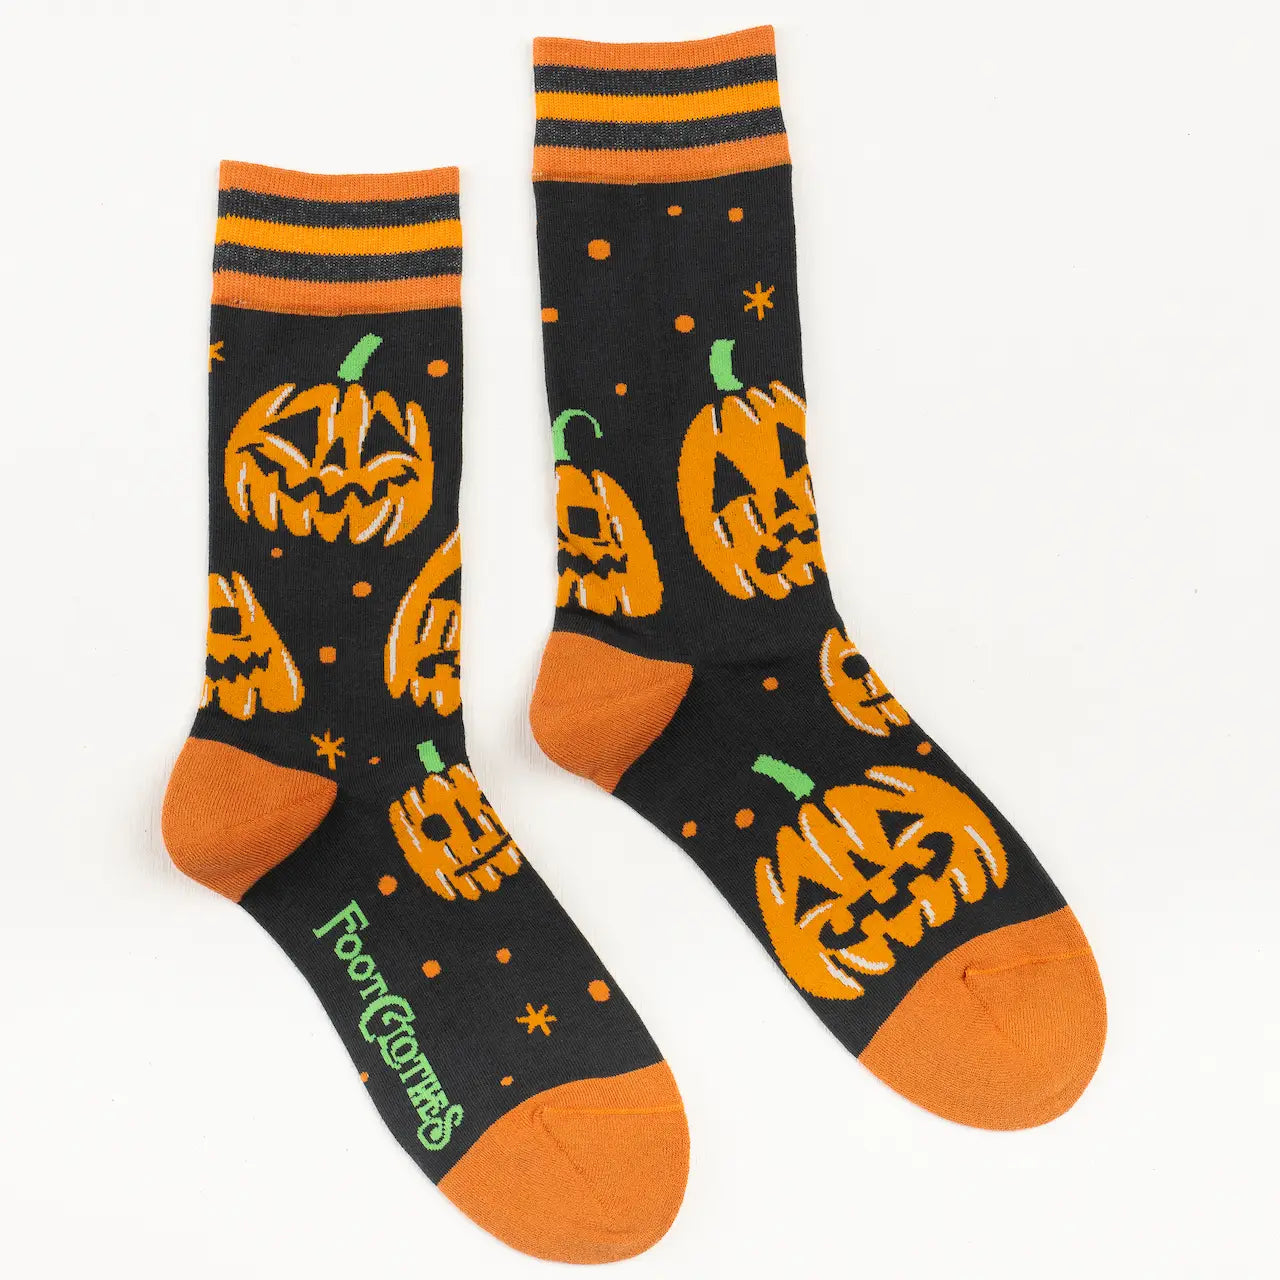 A pair of crew socks with orange and black stripes at their cuff and orange toes. The all over pattern on the socks is a group of three carved pumpkin surrounded by small orange stars